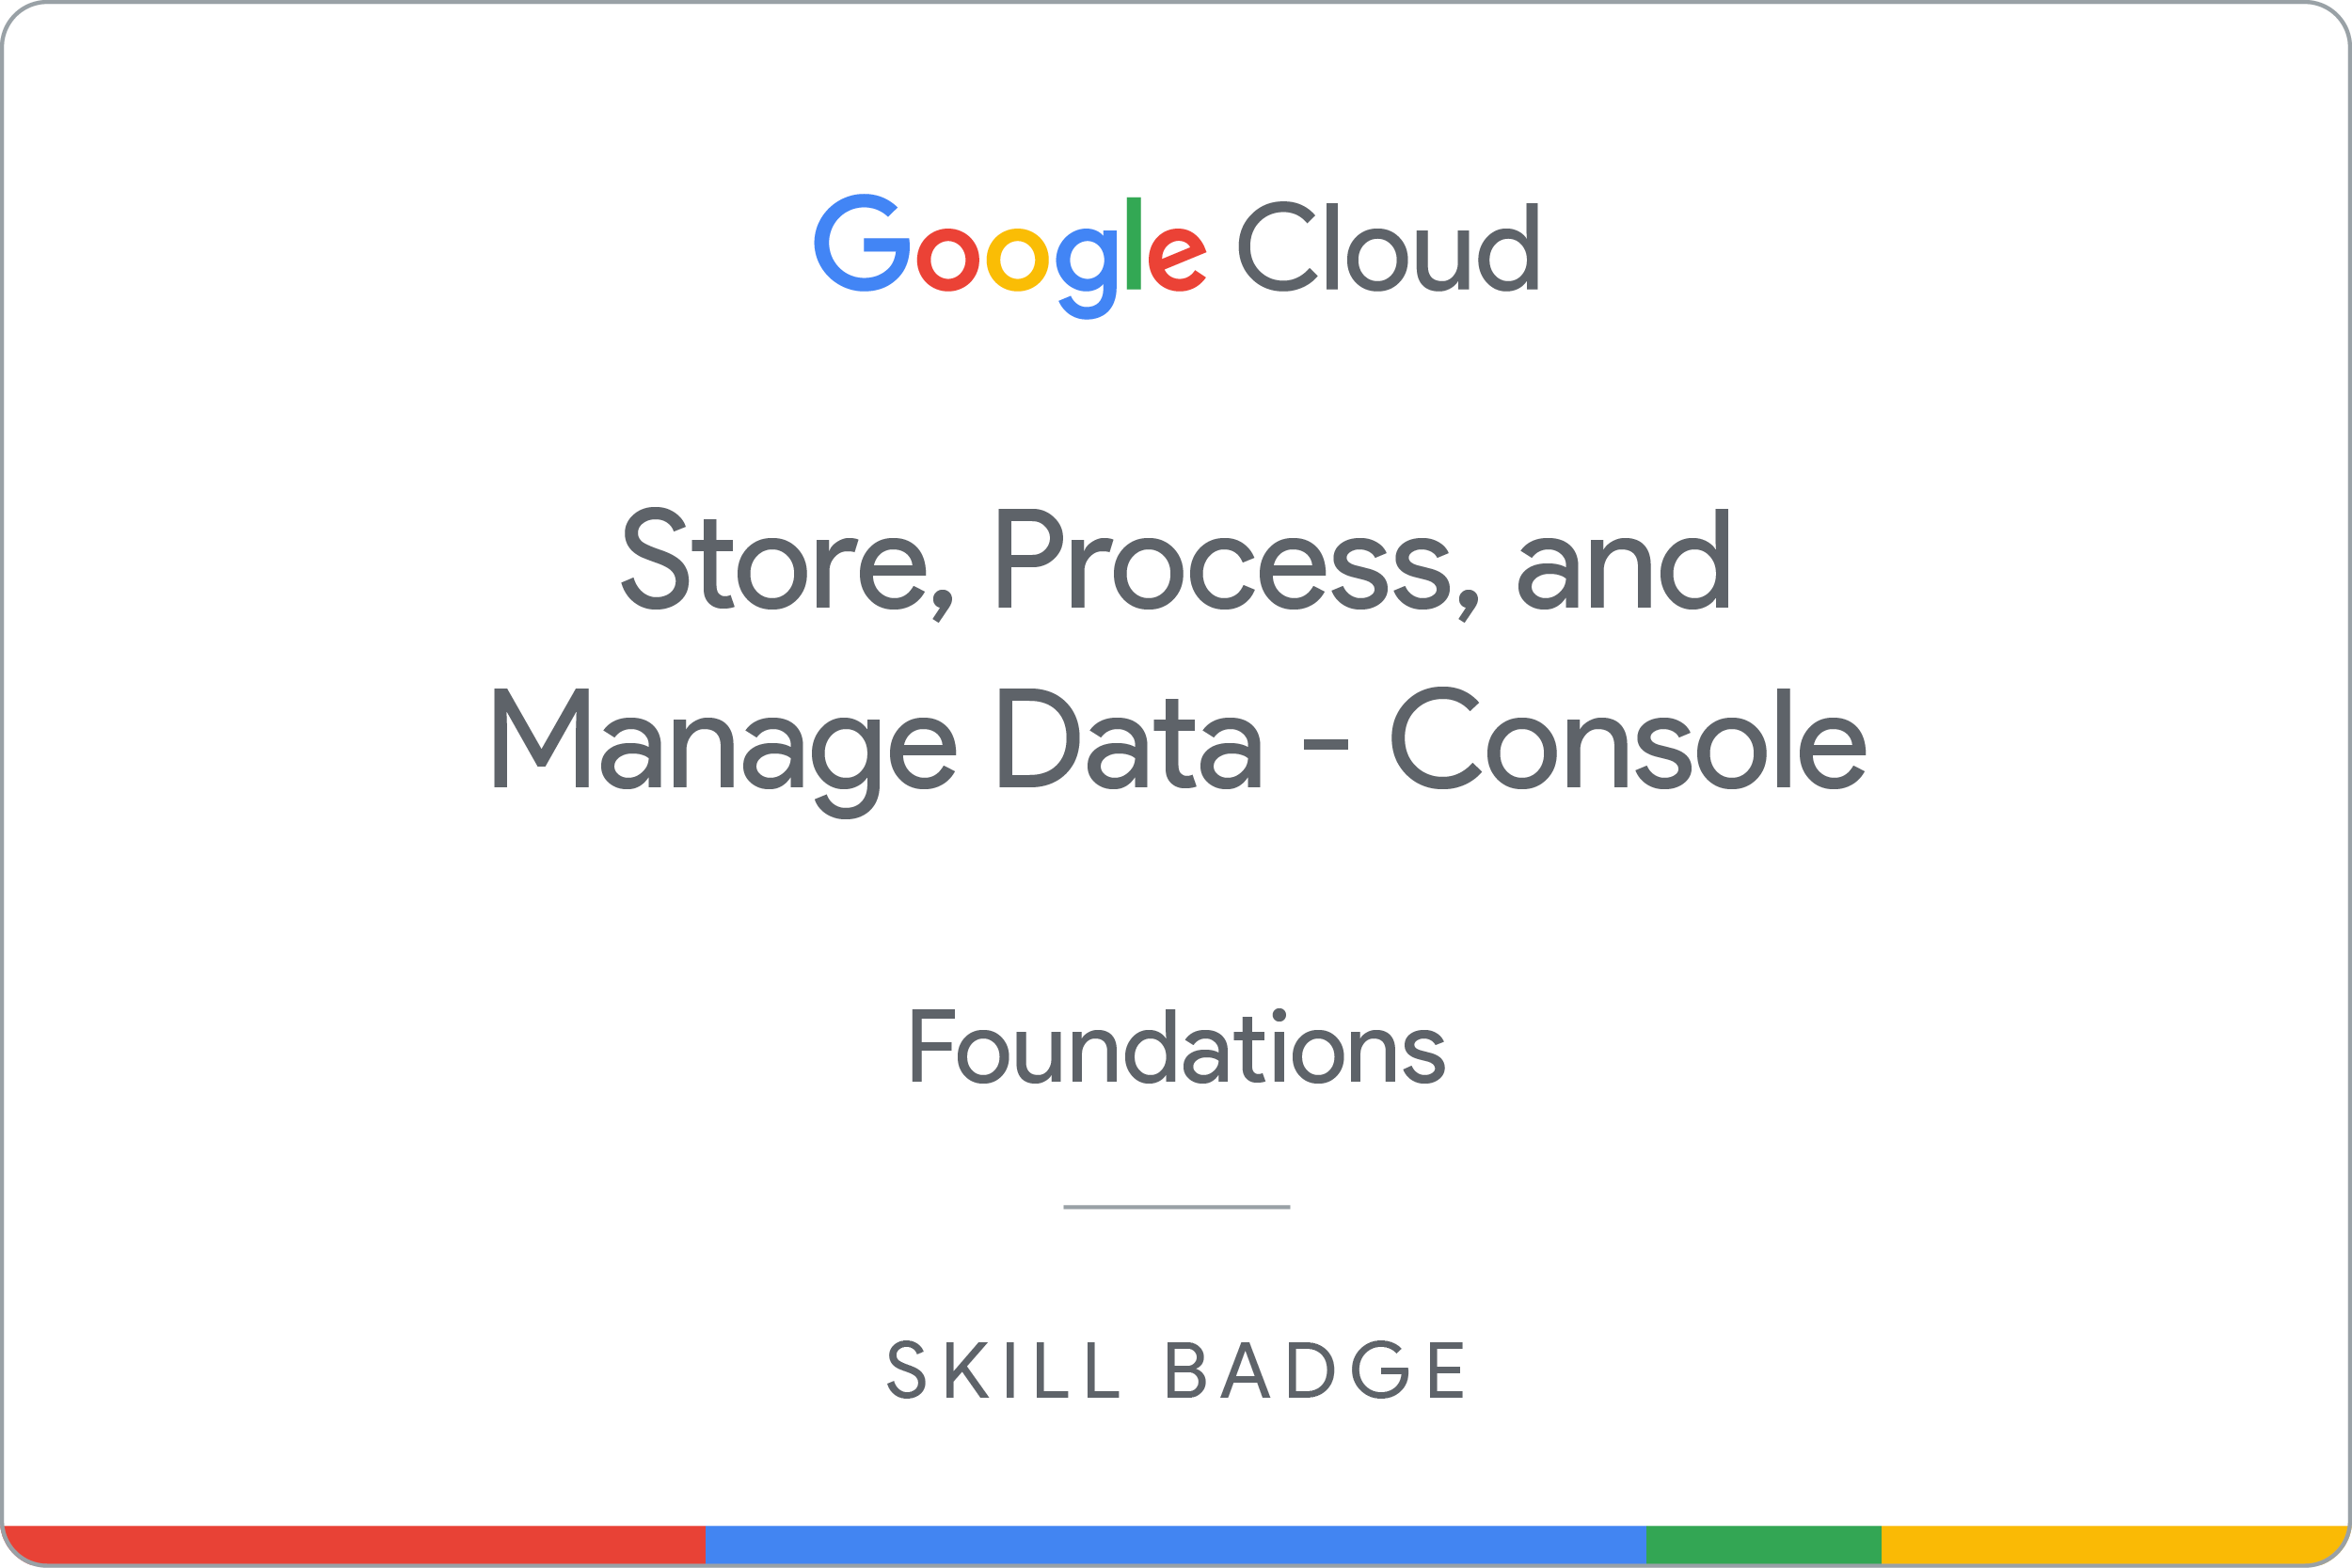 Store, Process, and Manage Data on Google Cloud badge